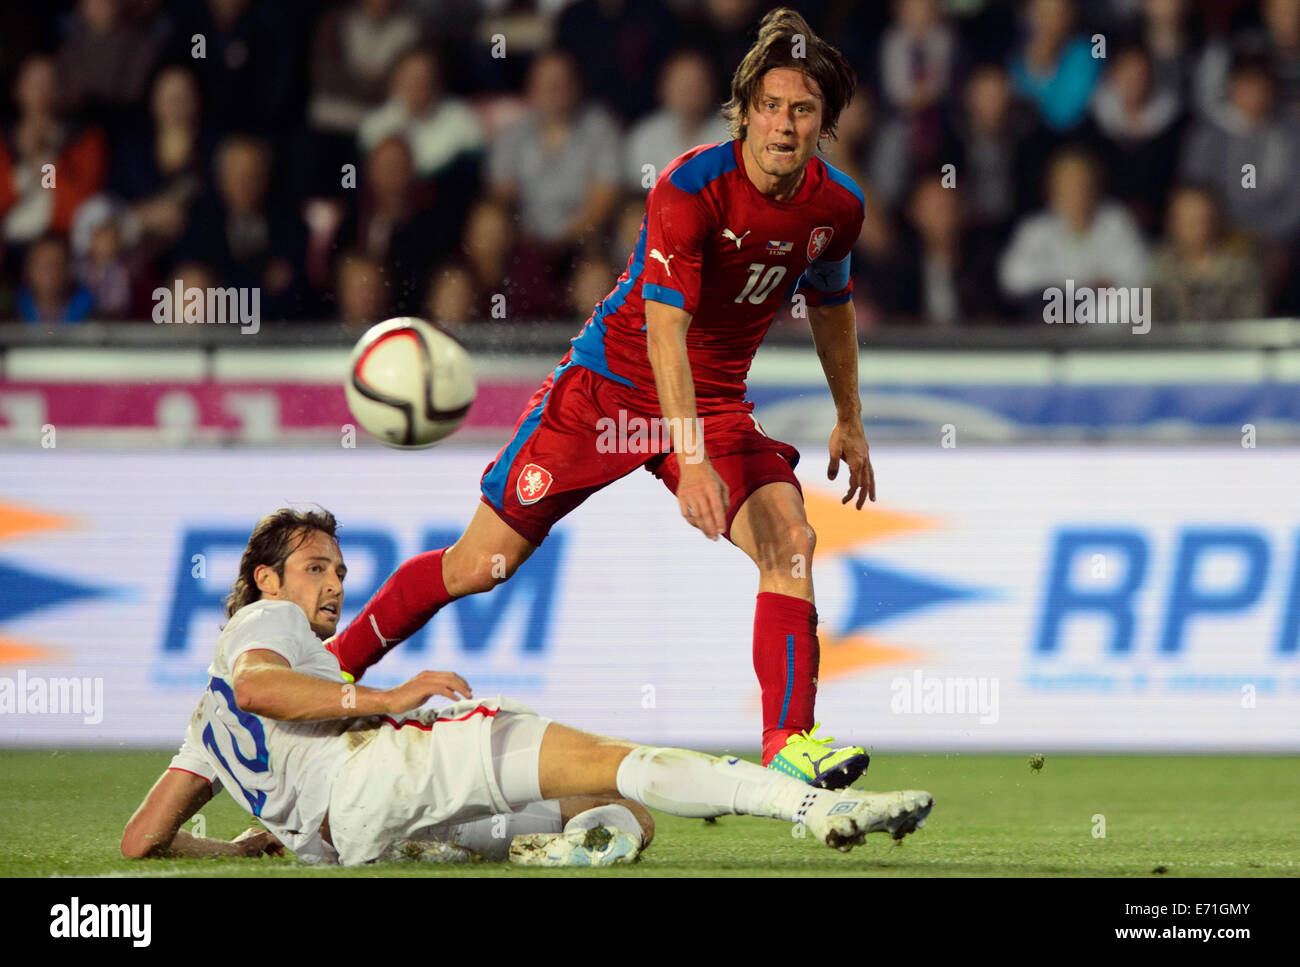 Prague, Czech Republic. 3rd Sep, 2014. Tomas Rosicky, right, of Czech Republic and Mix Diskerud of USA fight for a ball during the soccer friendly match Czech Republic vs USA in Prague, Czech Republic, September 3, 201 Credit: © Michal Kamaryt/CTK Photo/Alamy Live News  Stock Photo